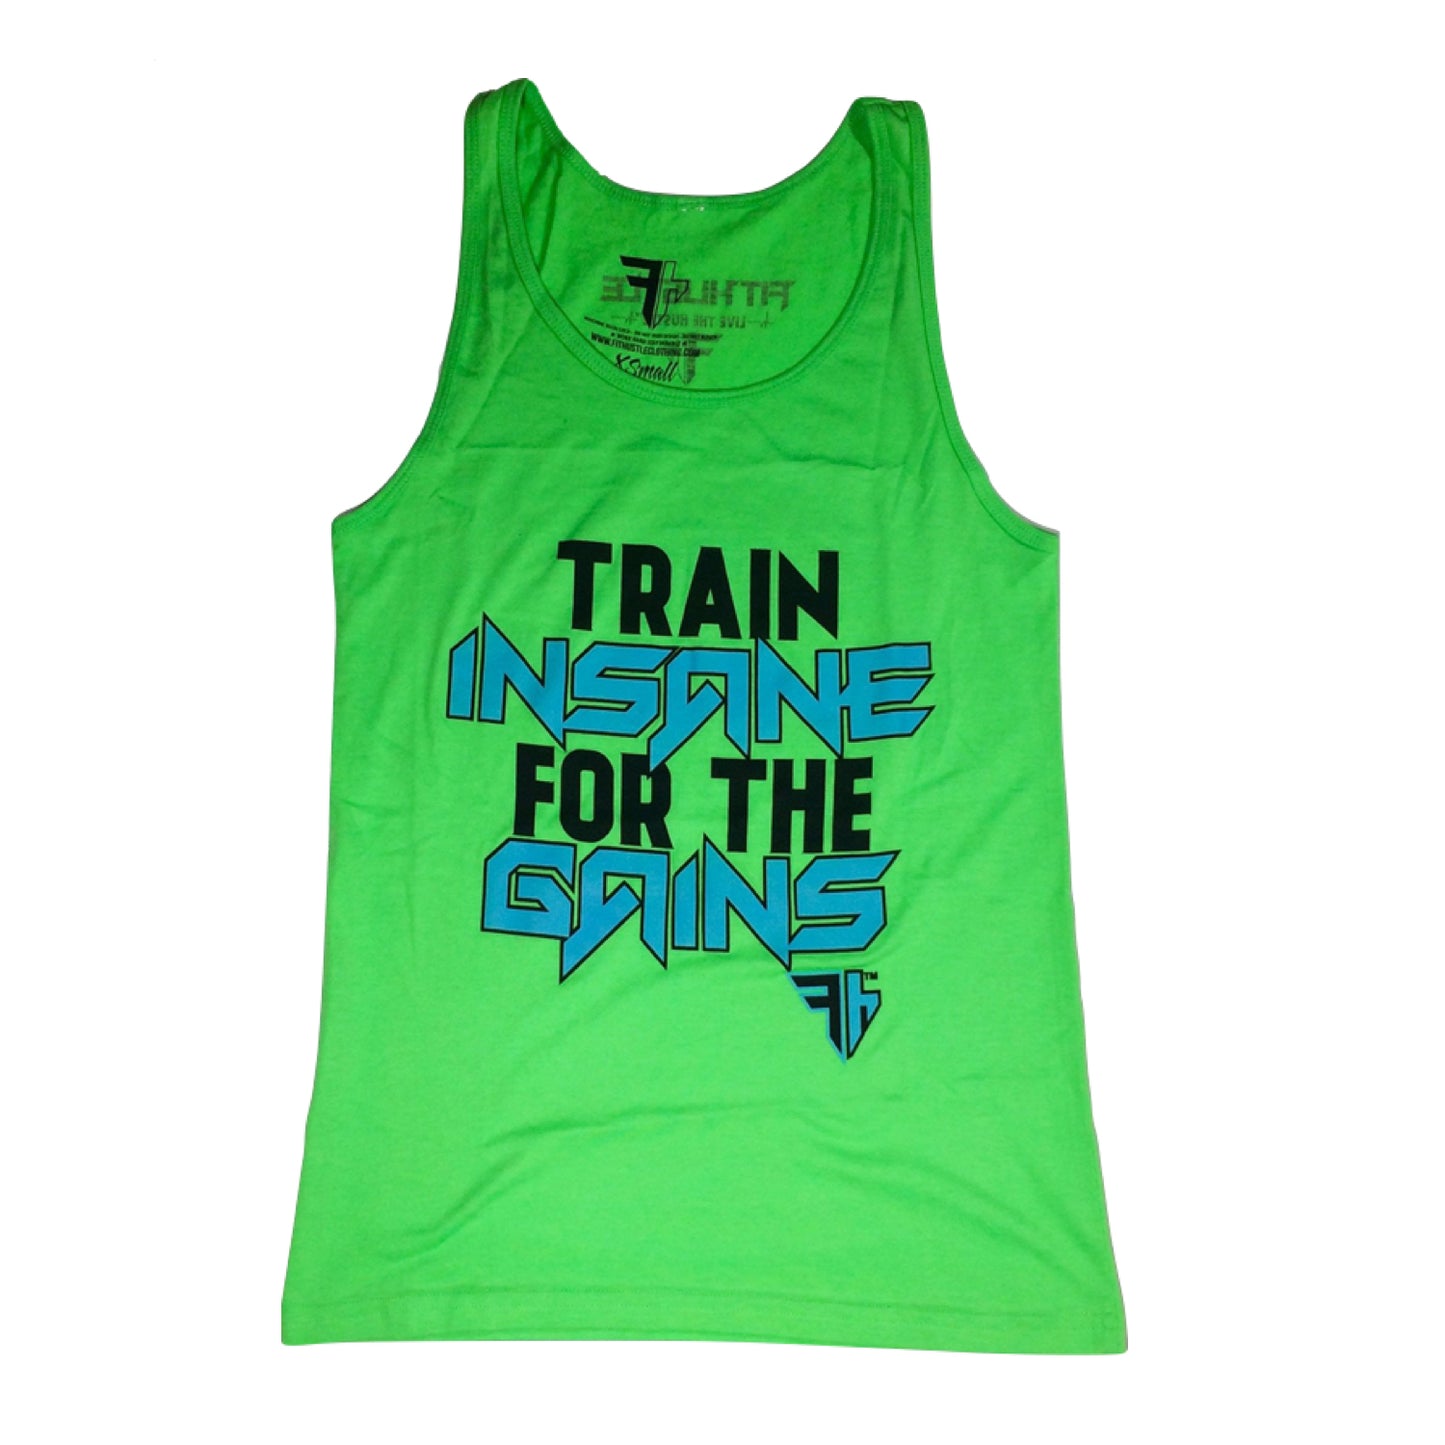 Train INSANE for the GAINS Unisex Tank Tops